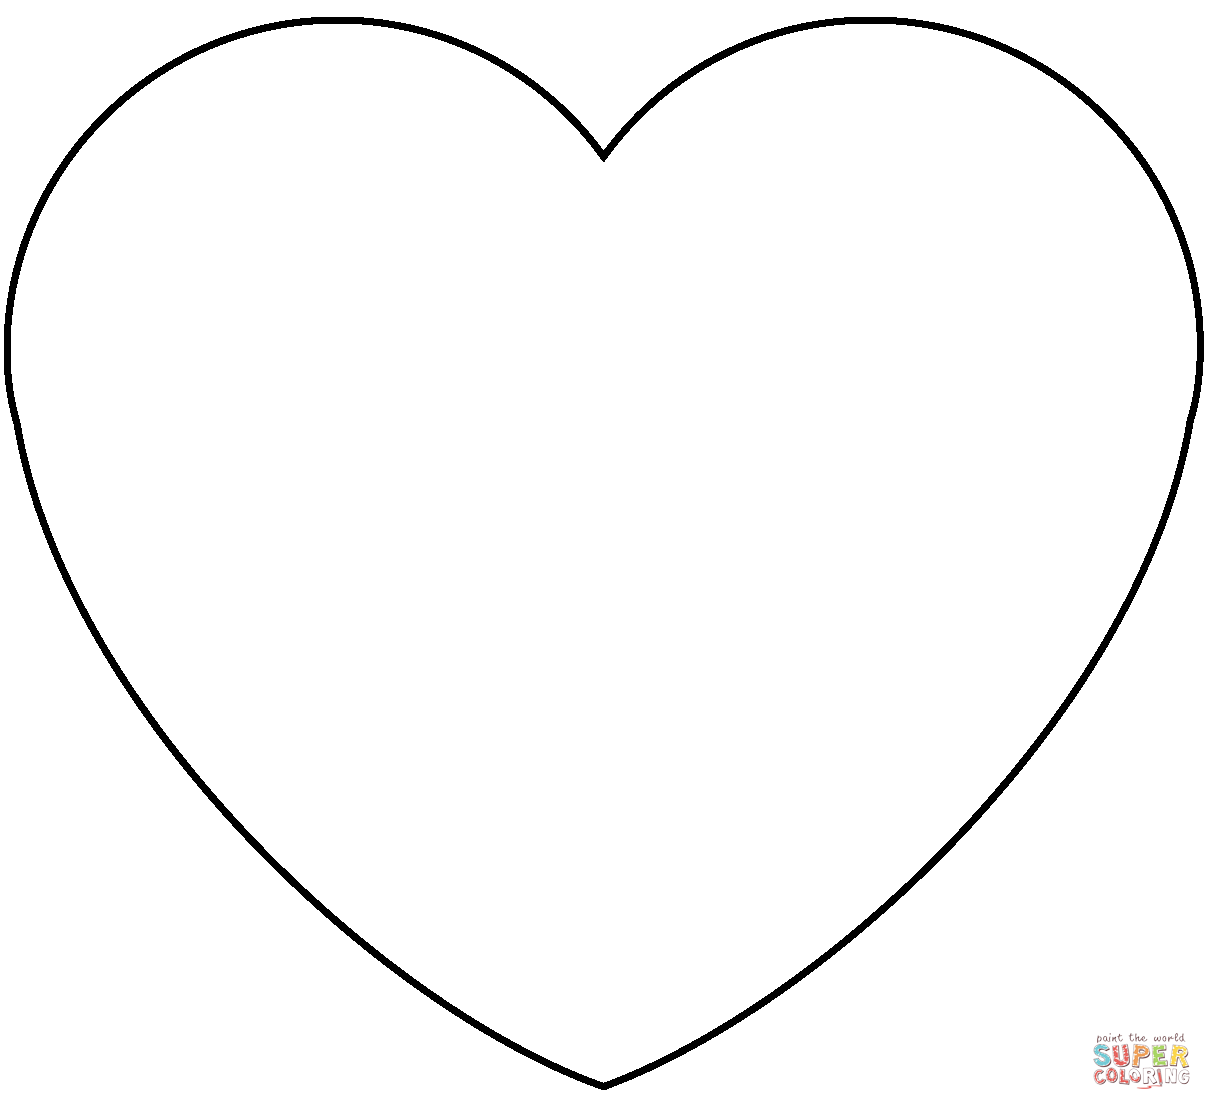 Red heart emoji coloring page free printable coloring pages